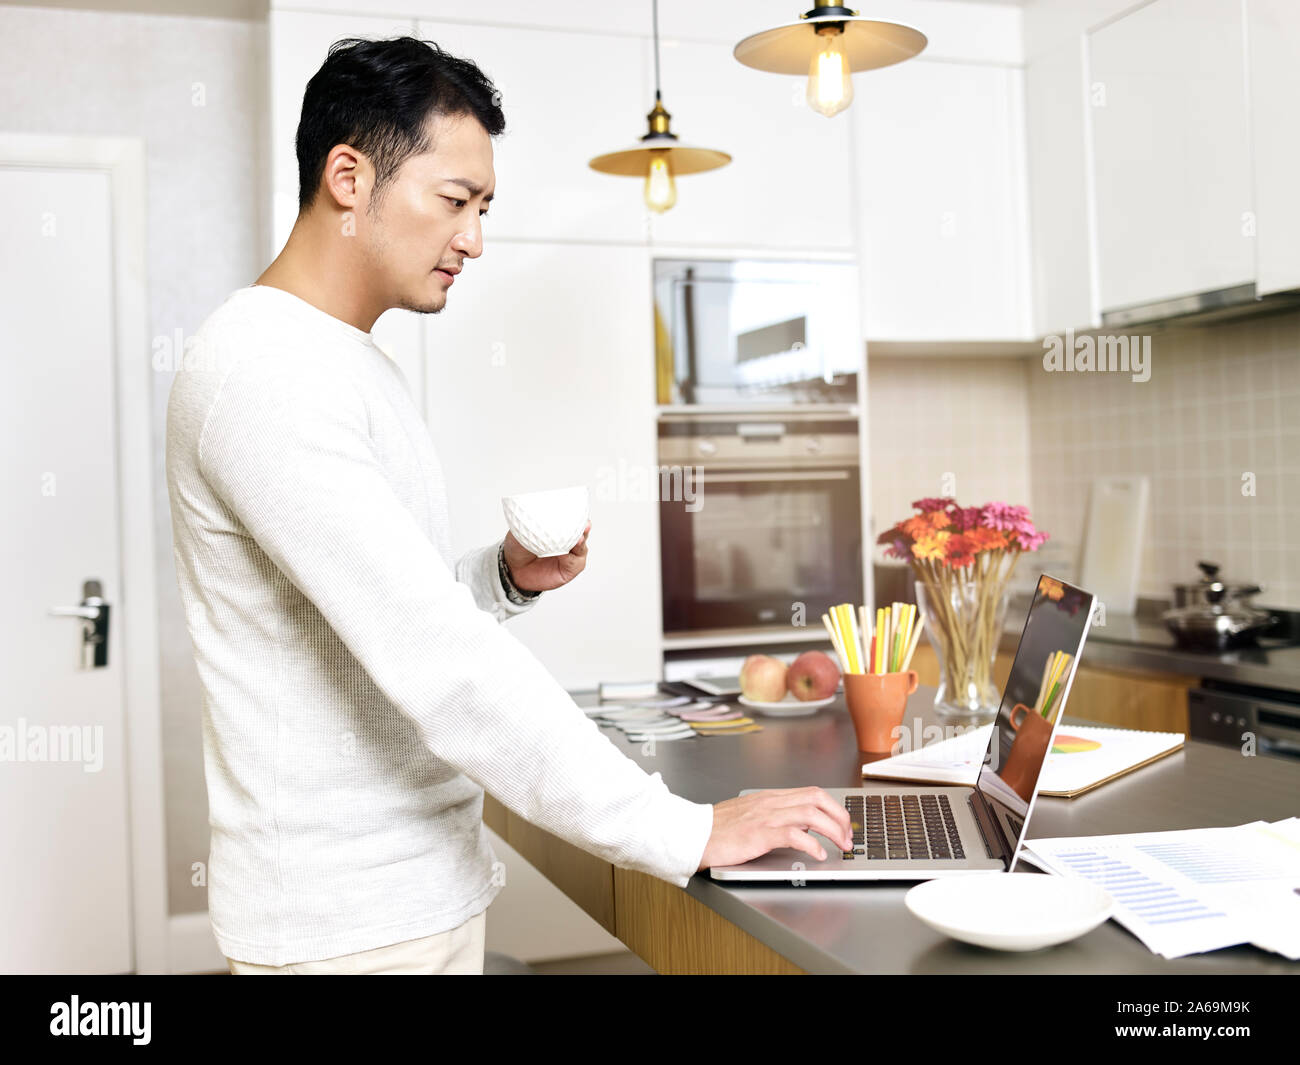 young asian man working from home standing by kitchen counter using laptop computer Stock Photo